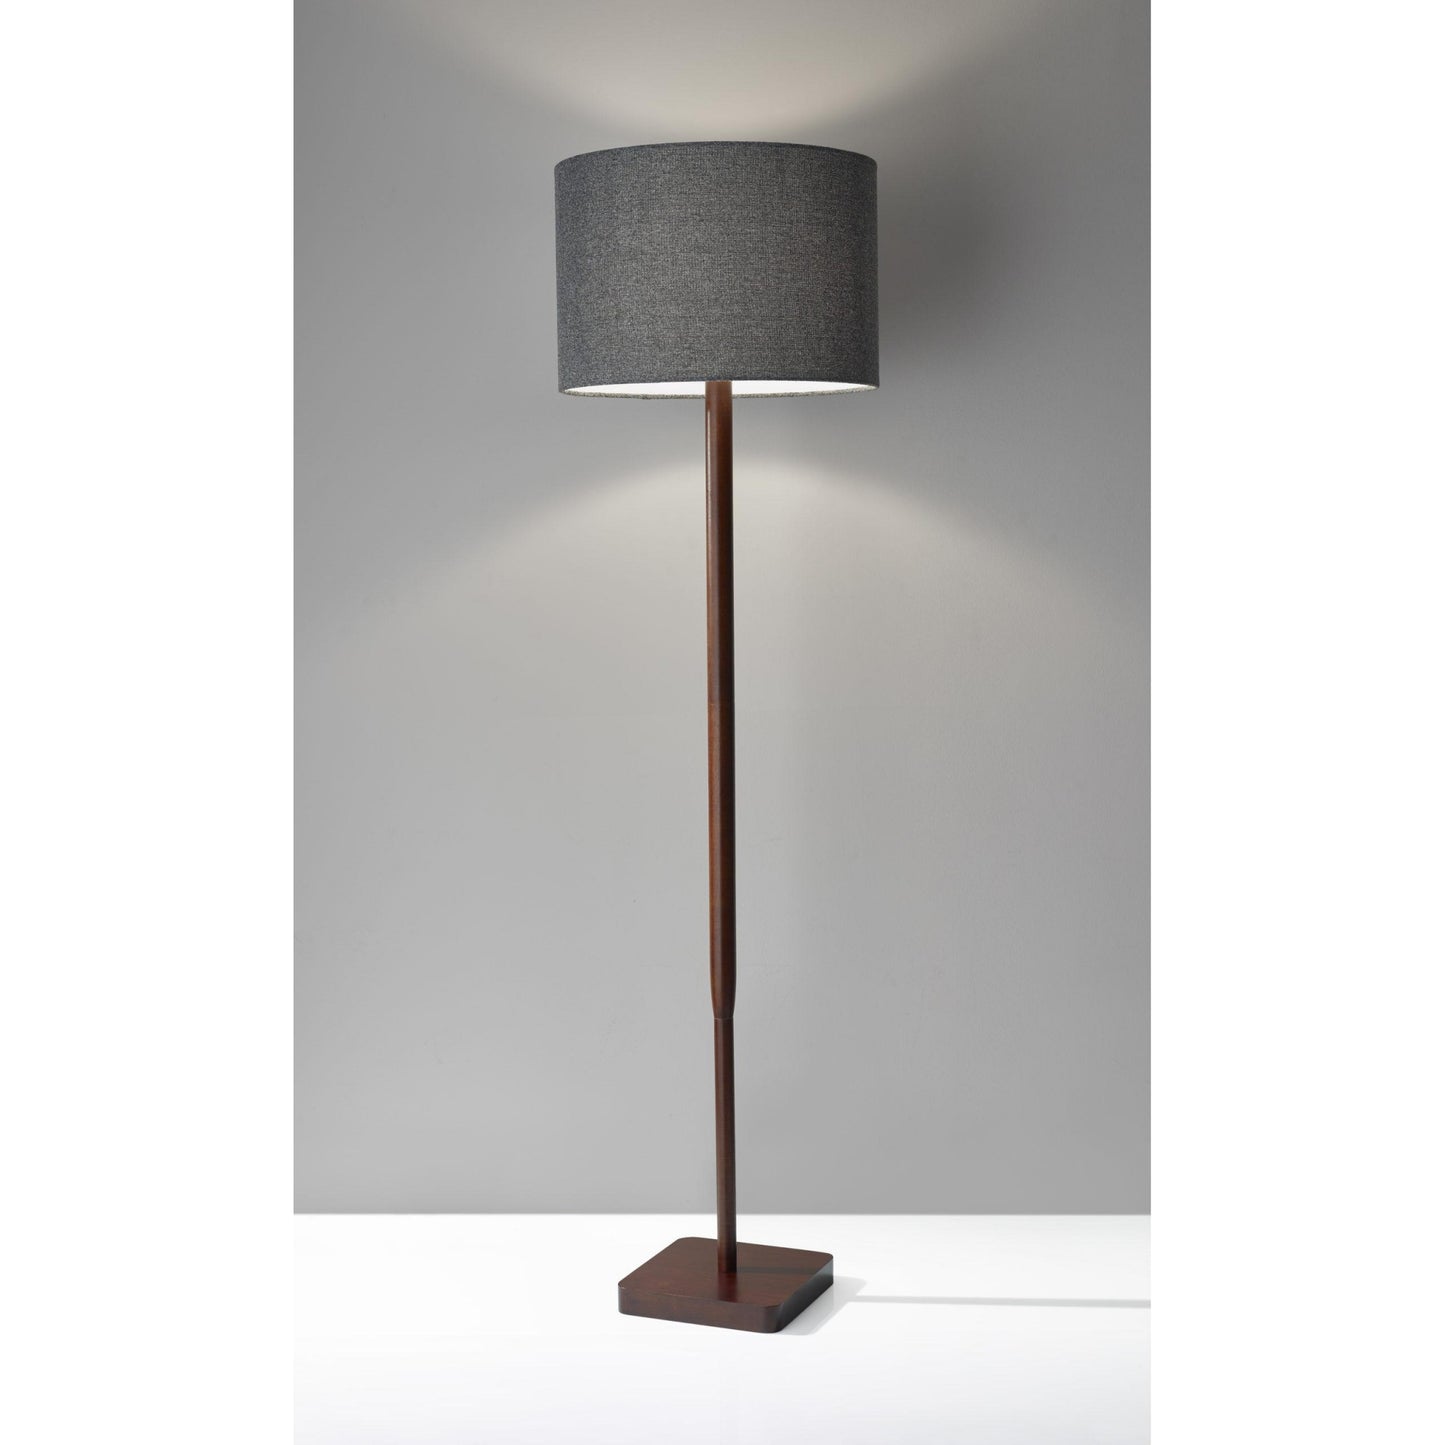 59" Solid Wood Traditional Shaped Floor Lamp With Black Drum Shade